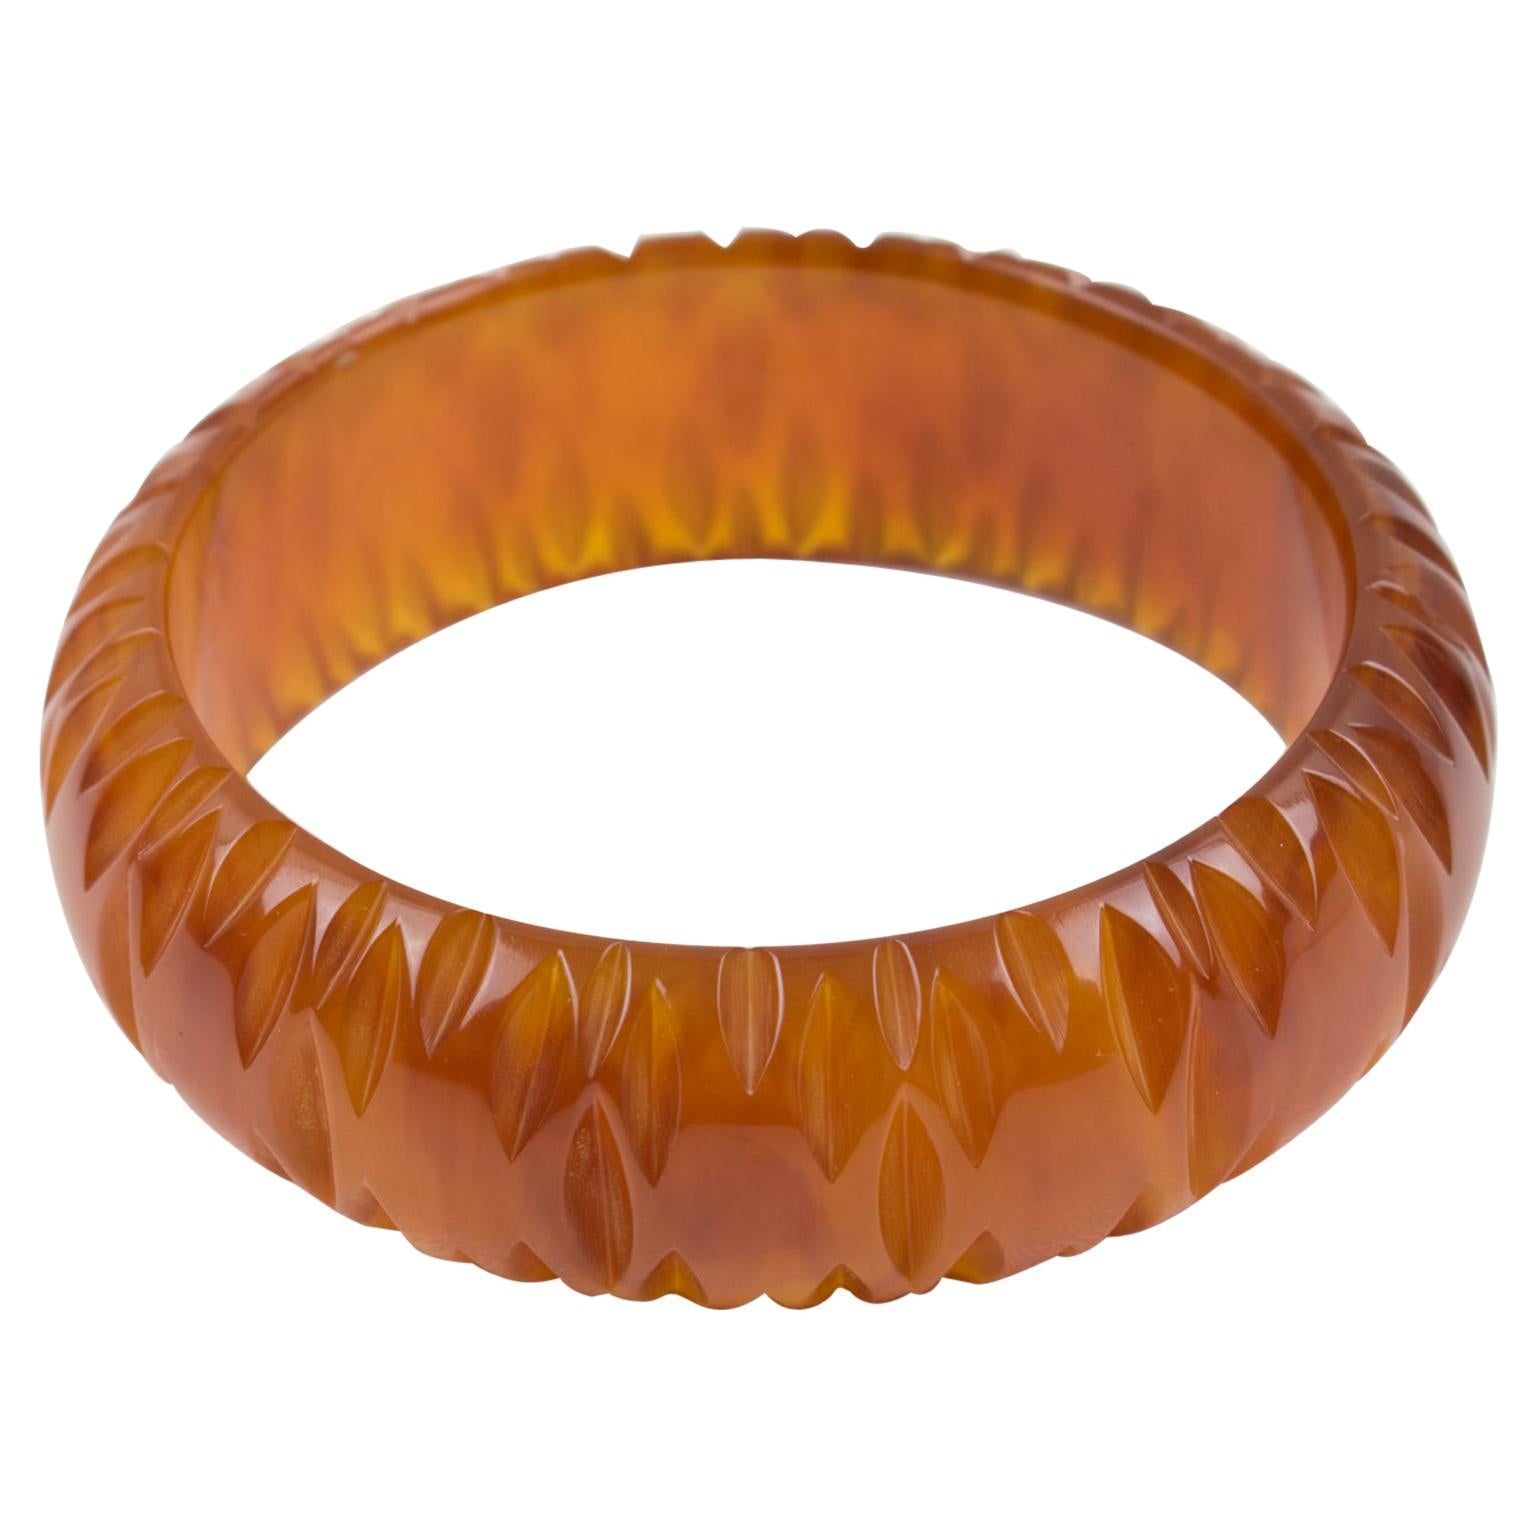 This stunning cinnamon-brown marble Bakelite bracelet bangle features a chunky domed shape with deep geometric carving all around. The piece boasts an intense spicy brown marble tone with red undertones, cloudy swirls, and lots of transparency in